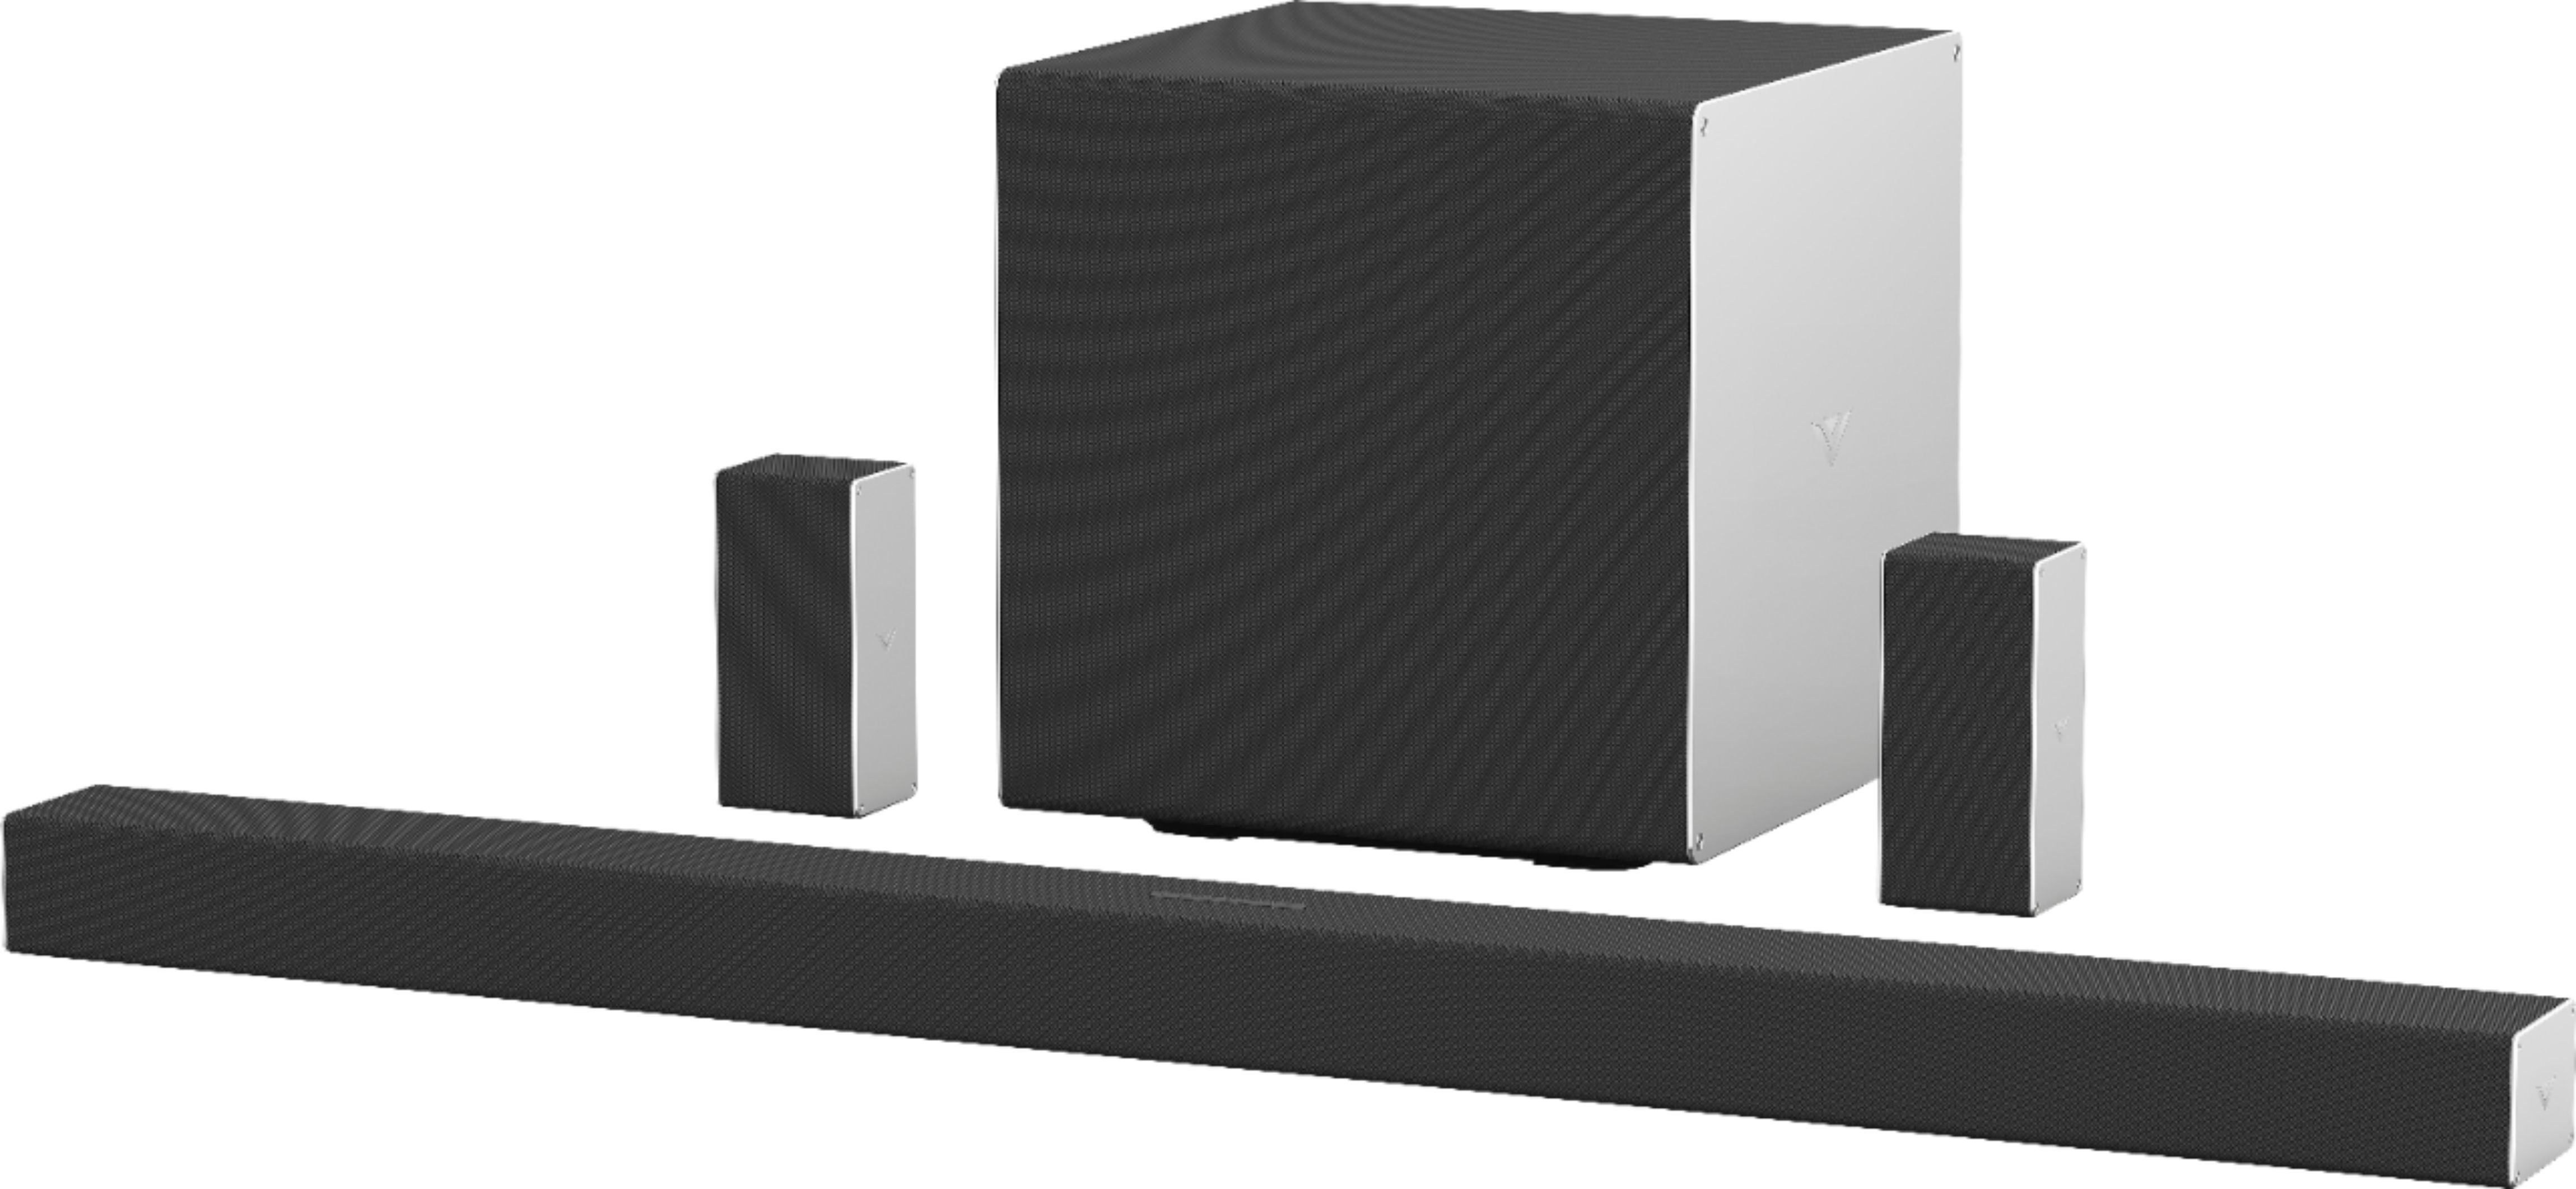 Angle View: VIZIO - 5.1.4-Channel Soundbar with Wireless Subwoofer, Dolby Atmos and Voice Assistant - Black